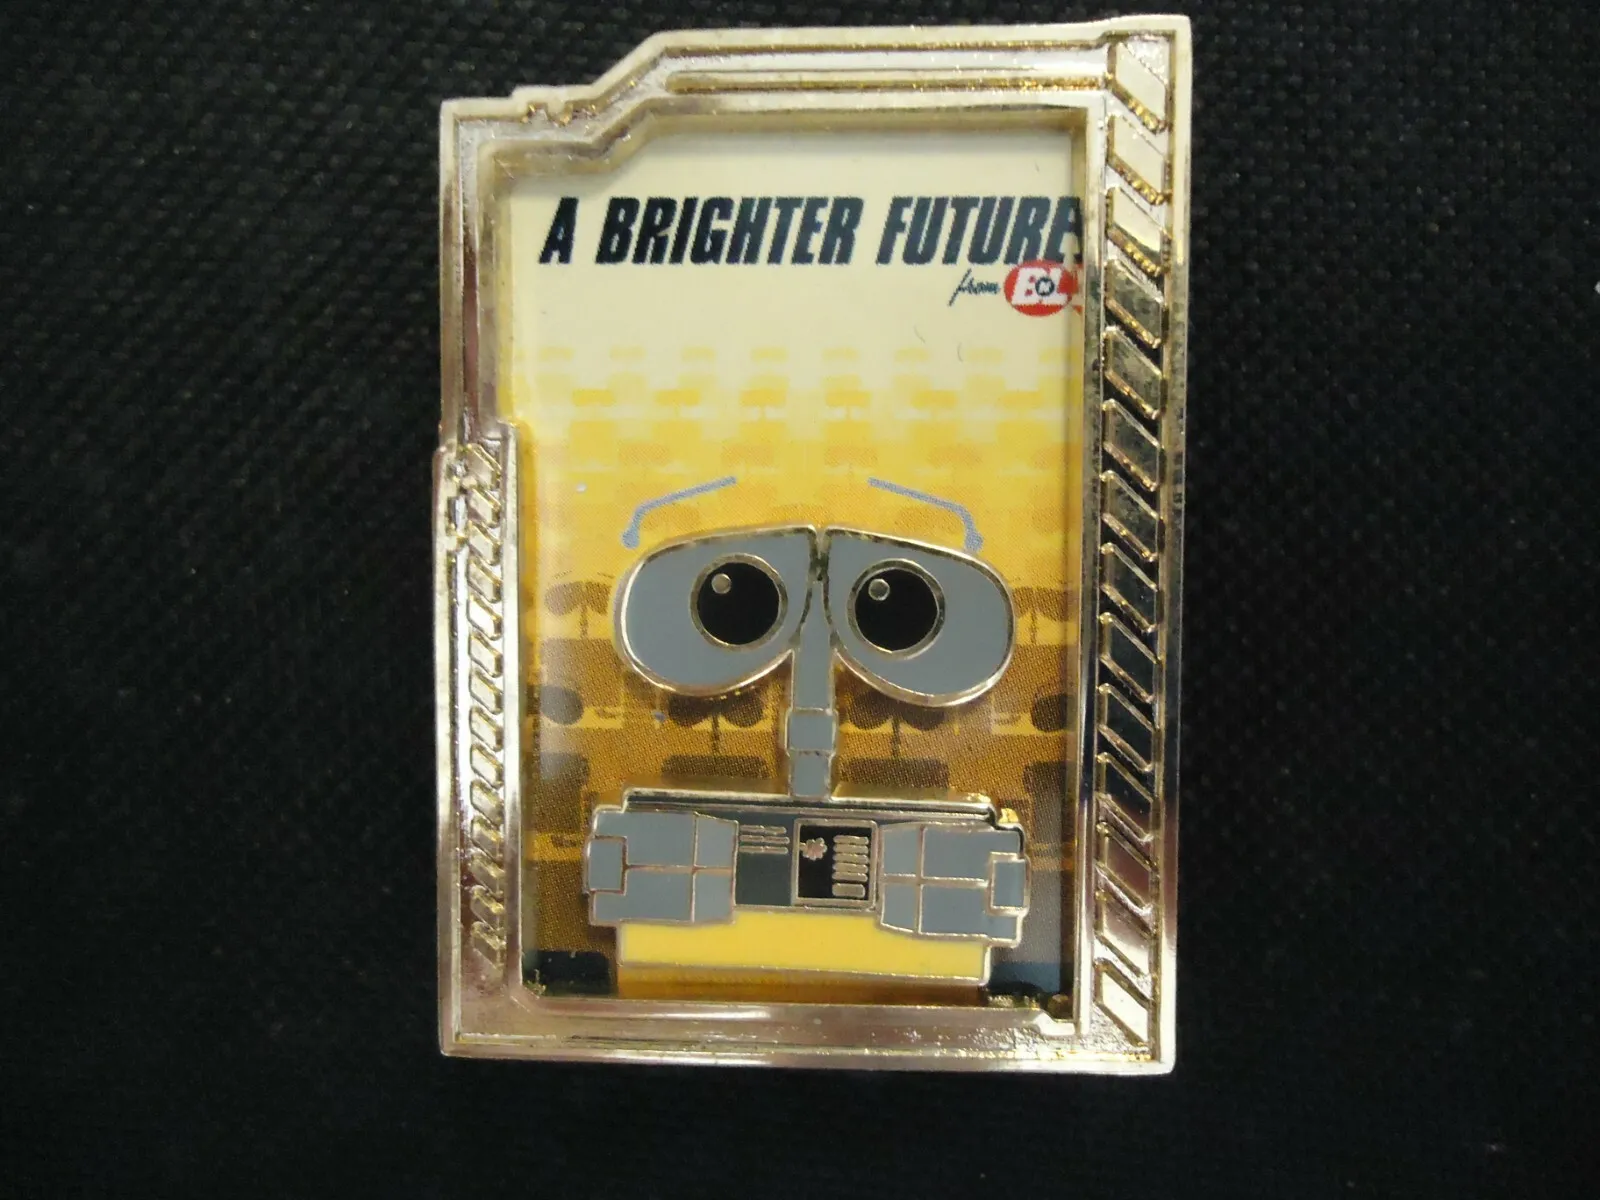 Disney Wdw Wall-e Opening Day 2008 Boxed Set A Brighter Future Only Pin Le 500